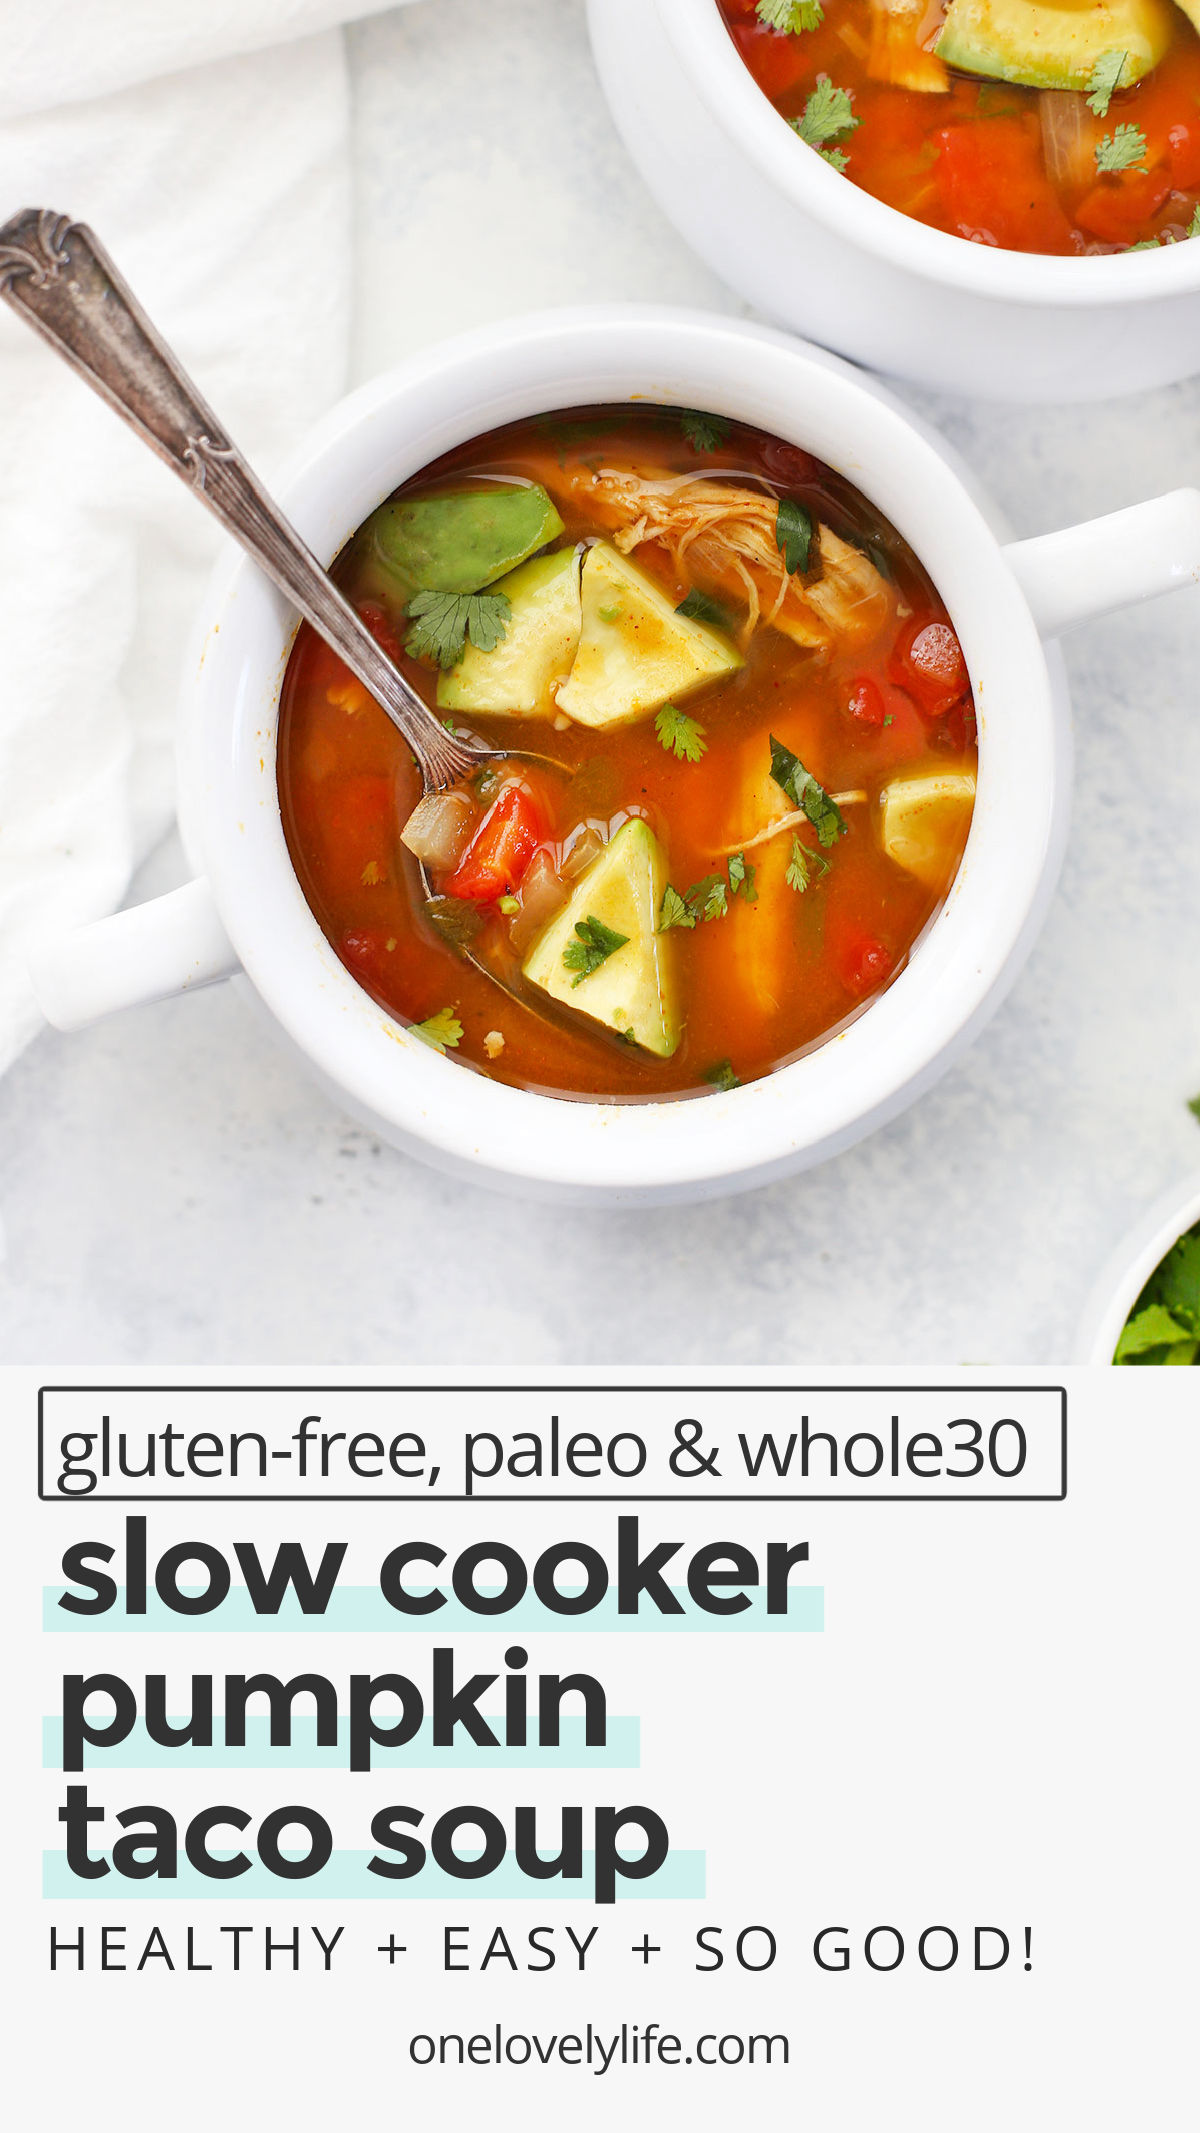 Slow Cooker Pumpkin Taco Soup - This easy paleo slow cooker recipe makes the BEST taco soup. We make it year round! (Gluten Free, Paleo & Whole30) // Slow Cooker Taco Soup // Instant Pot Taco Soup // Whole30 Slow Cooker // Crockpot Soup // Taco Soup Recipe #paleo #glutenfree #whole30 #slowcooker #crockpot #tacosoup #pumpkin